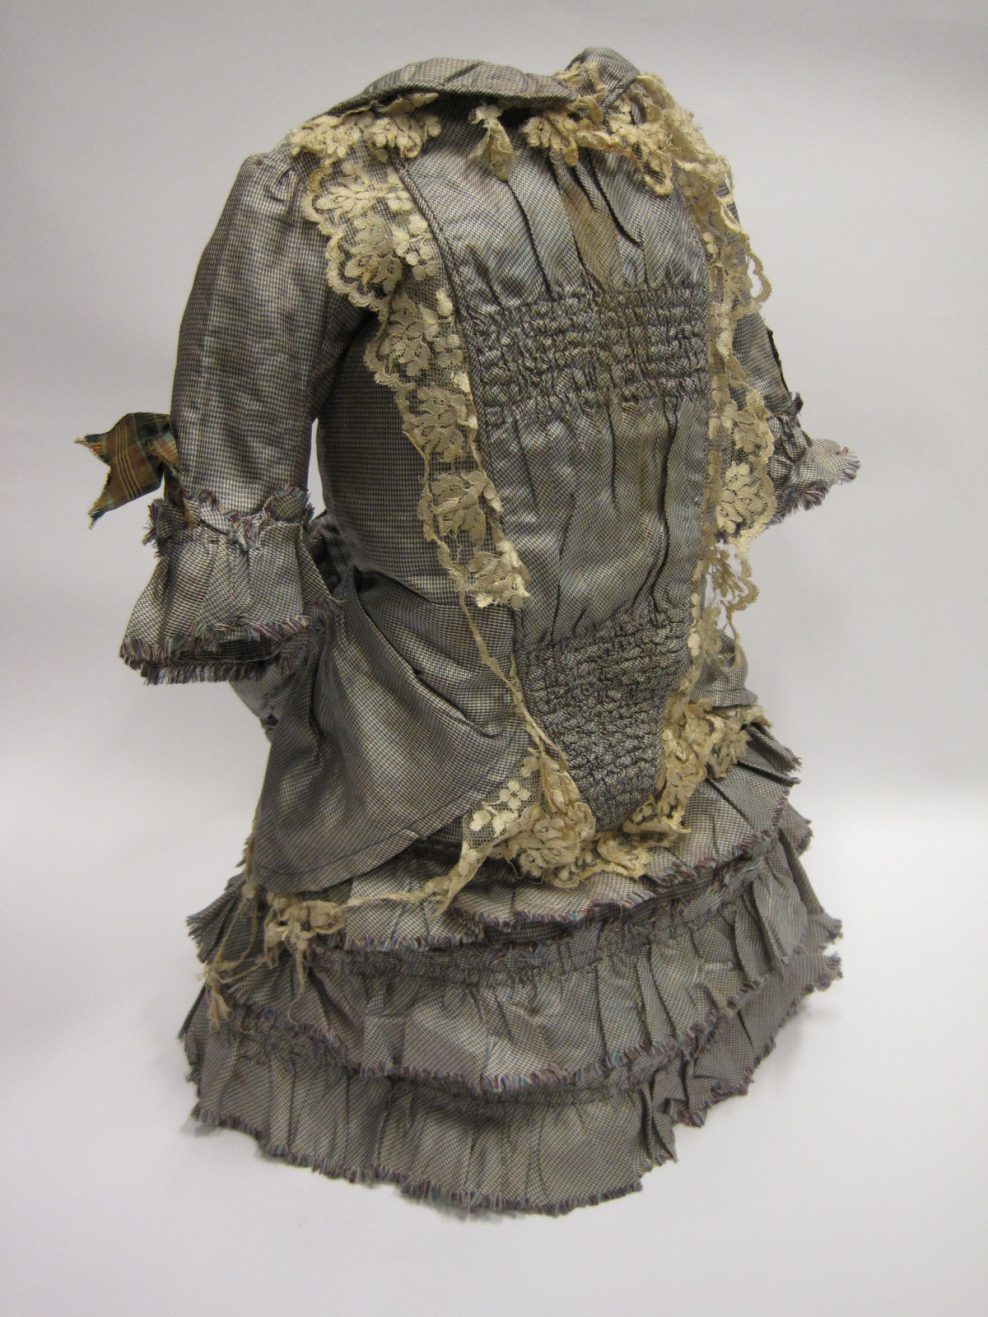 1870s Child’s dress from Swansea Museum